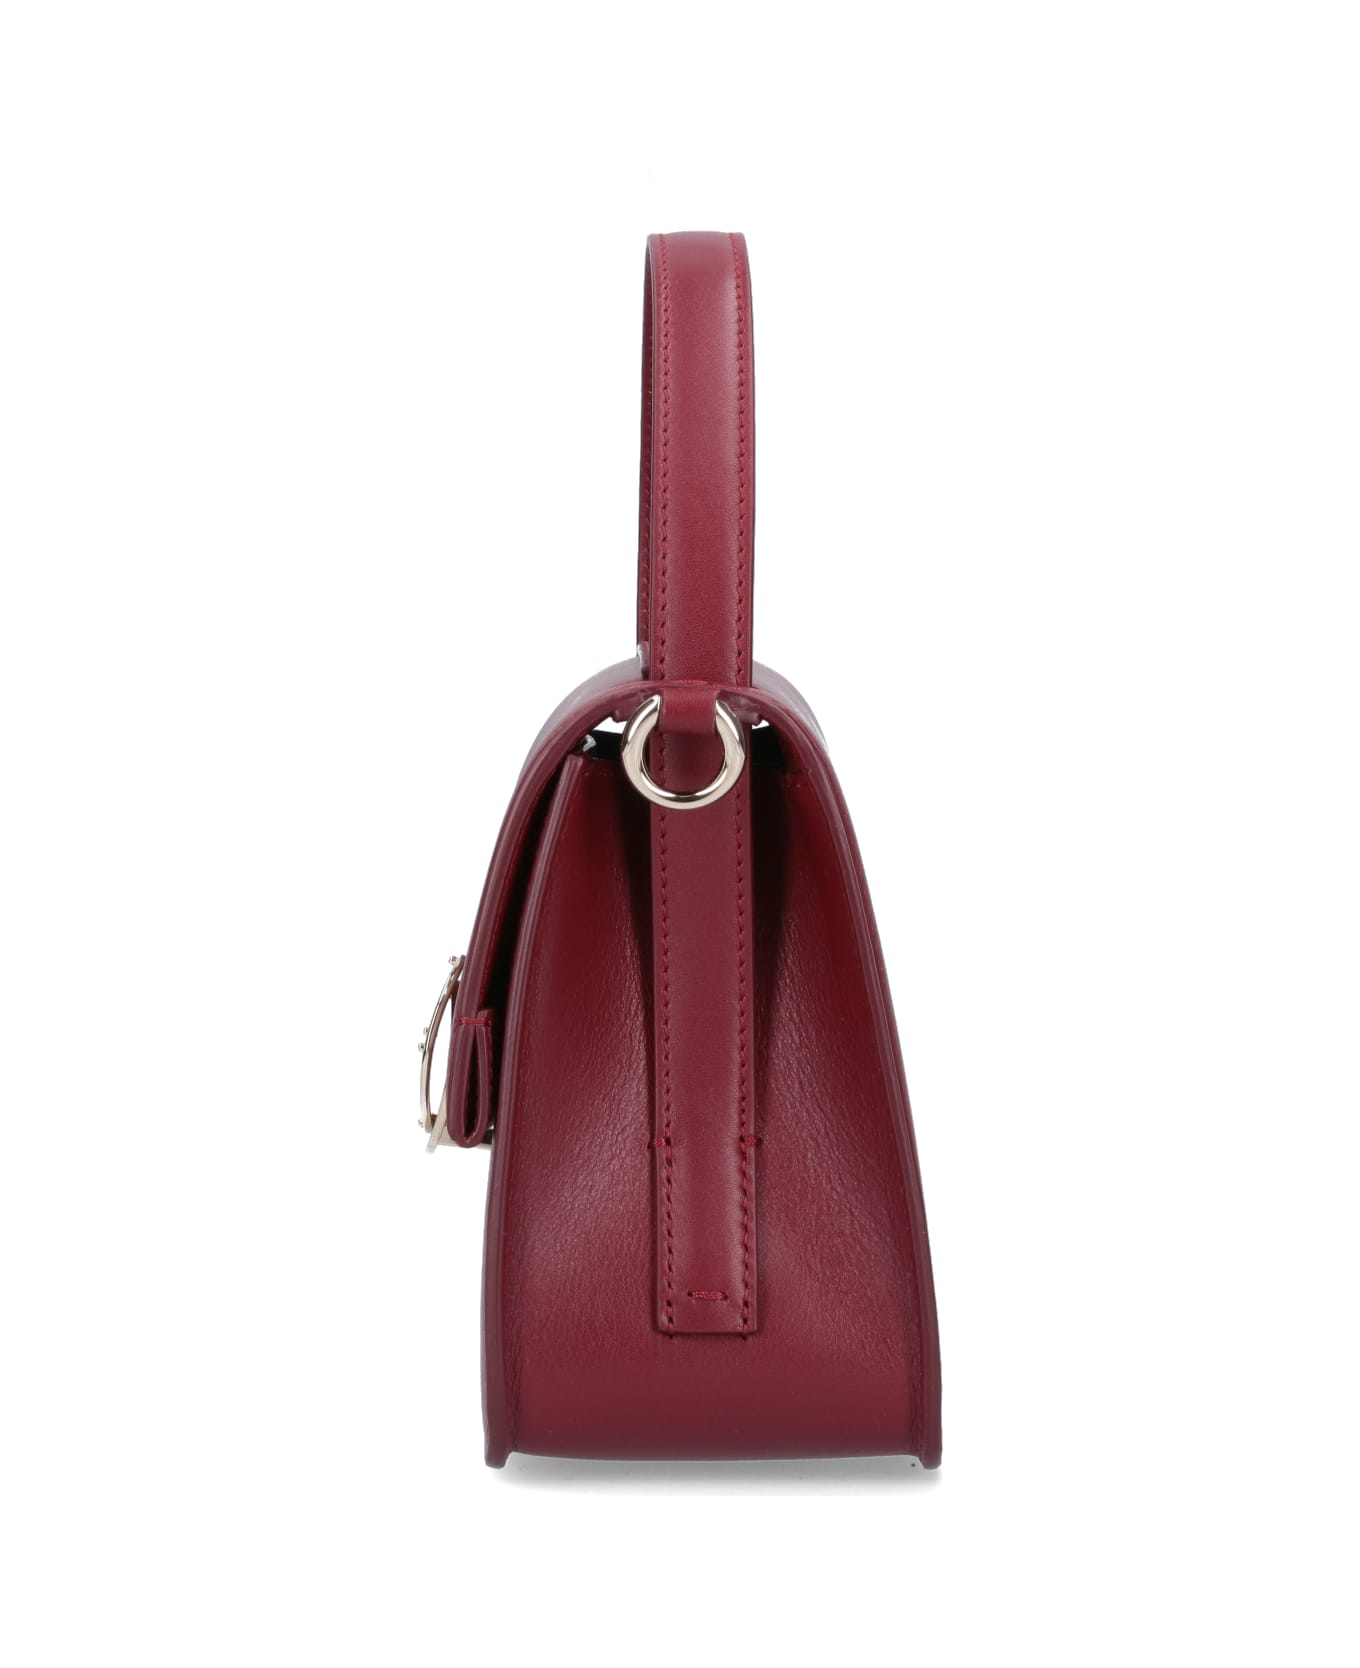 Chloé Small Bag "penelope" - Red